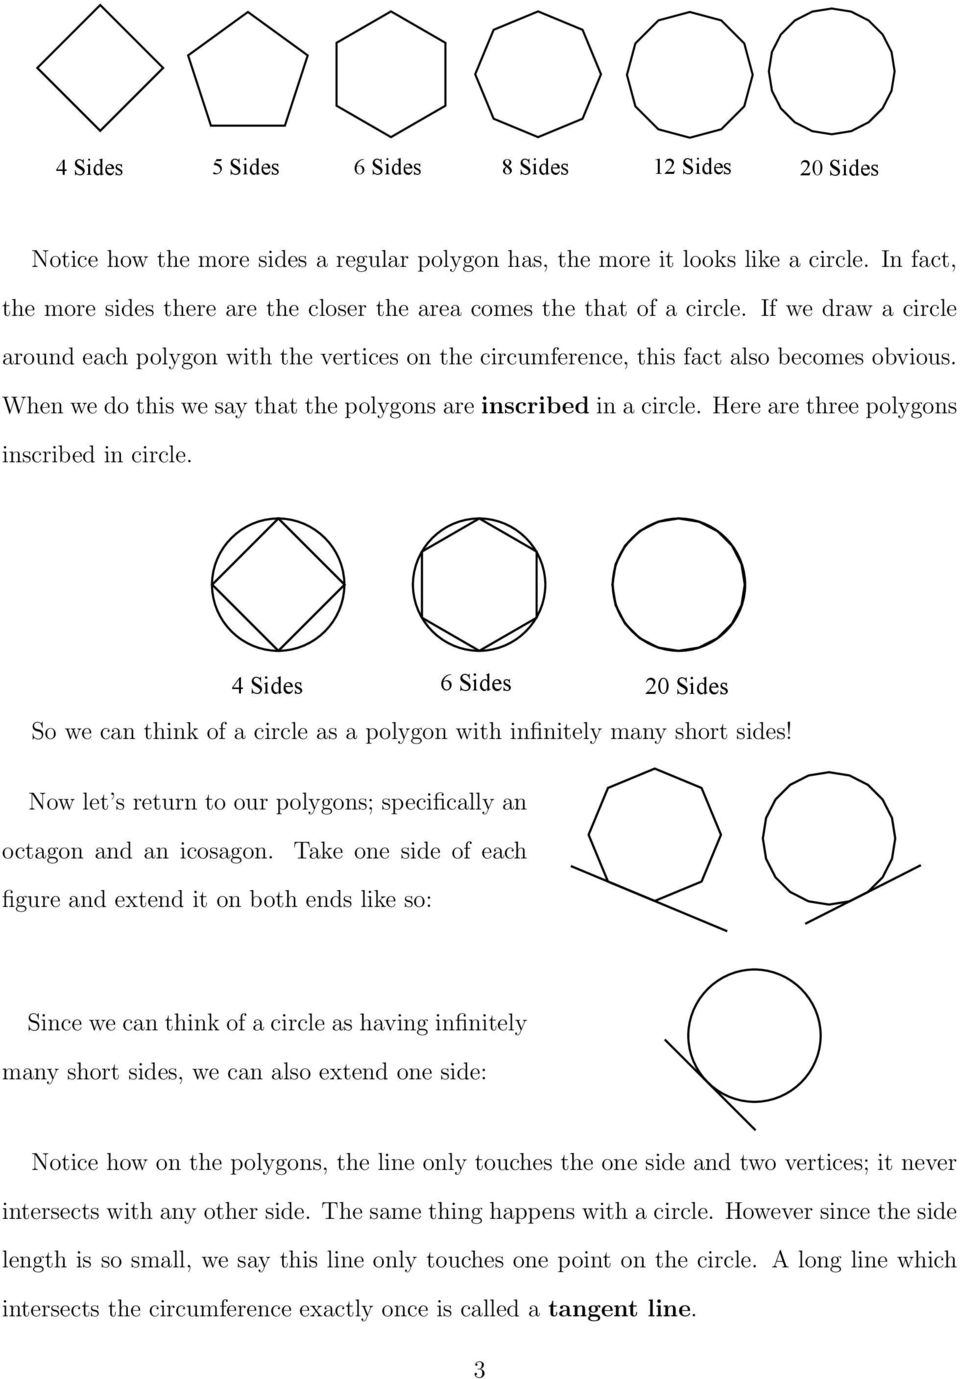 When we do this we say that the polygons are inscribed in a circle. Here are three polygons inscribed in circle.